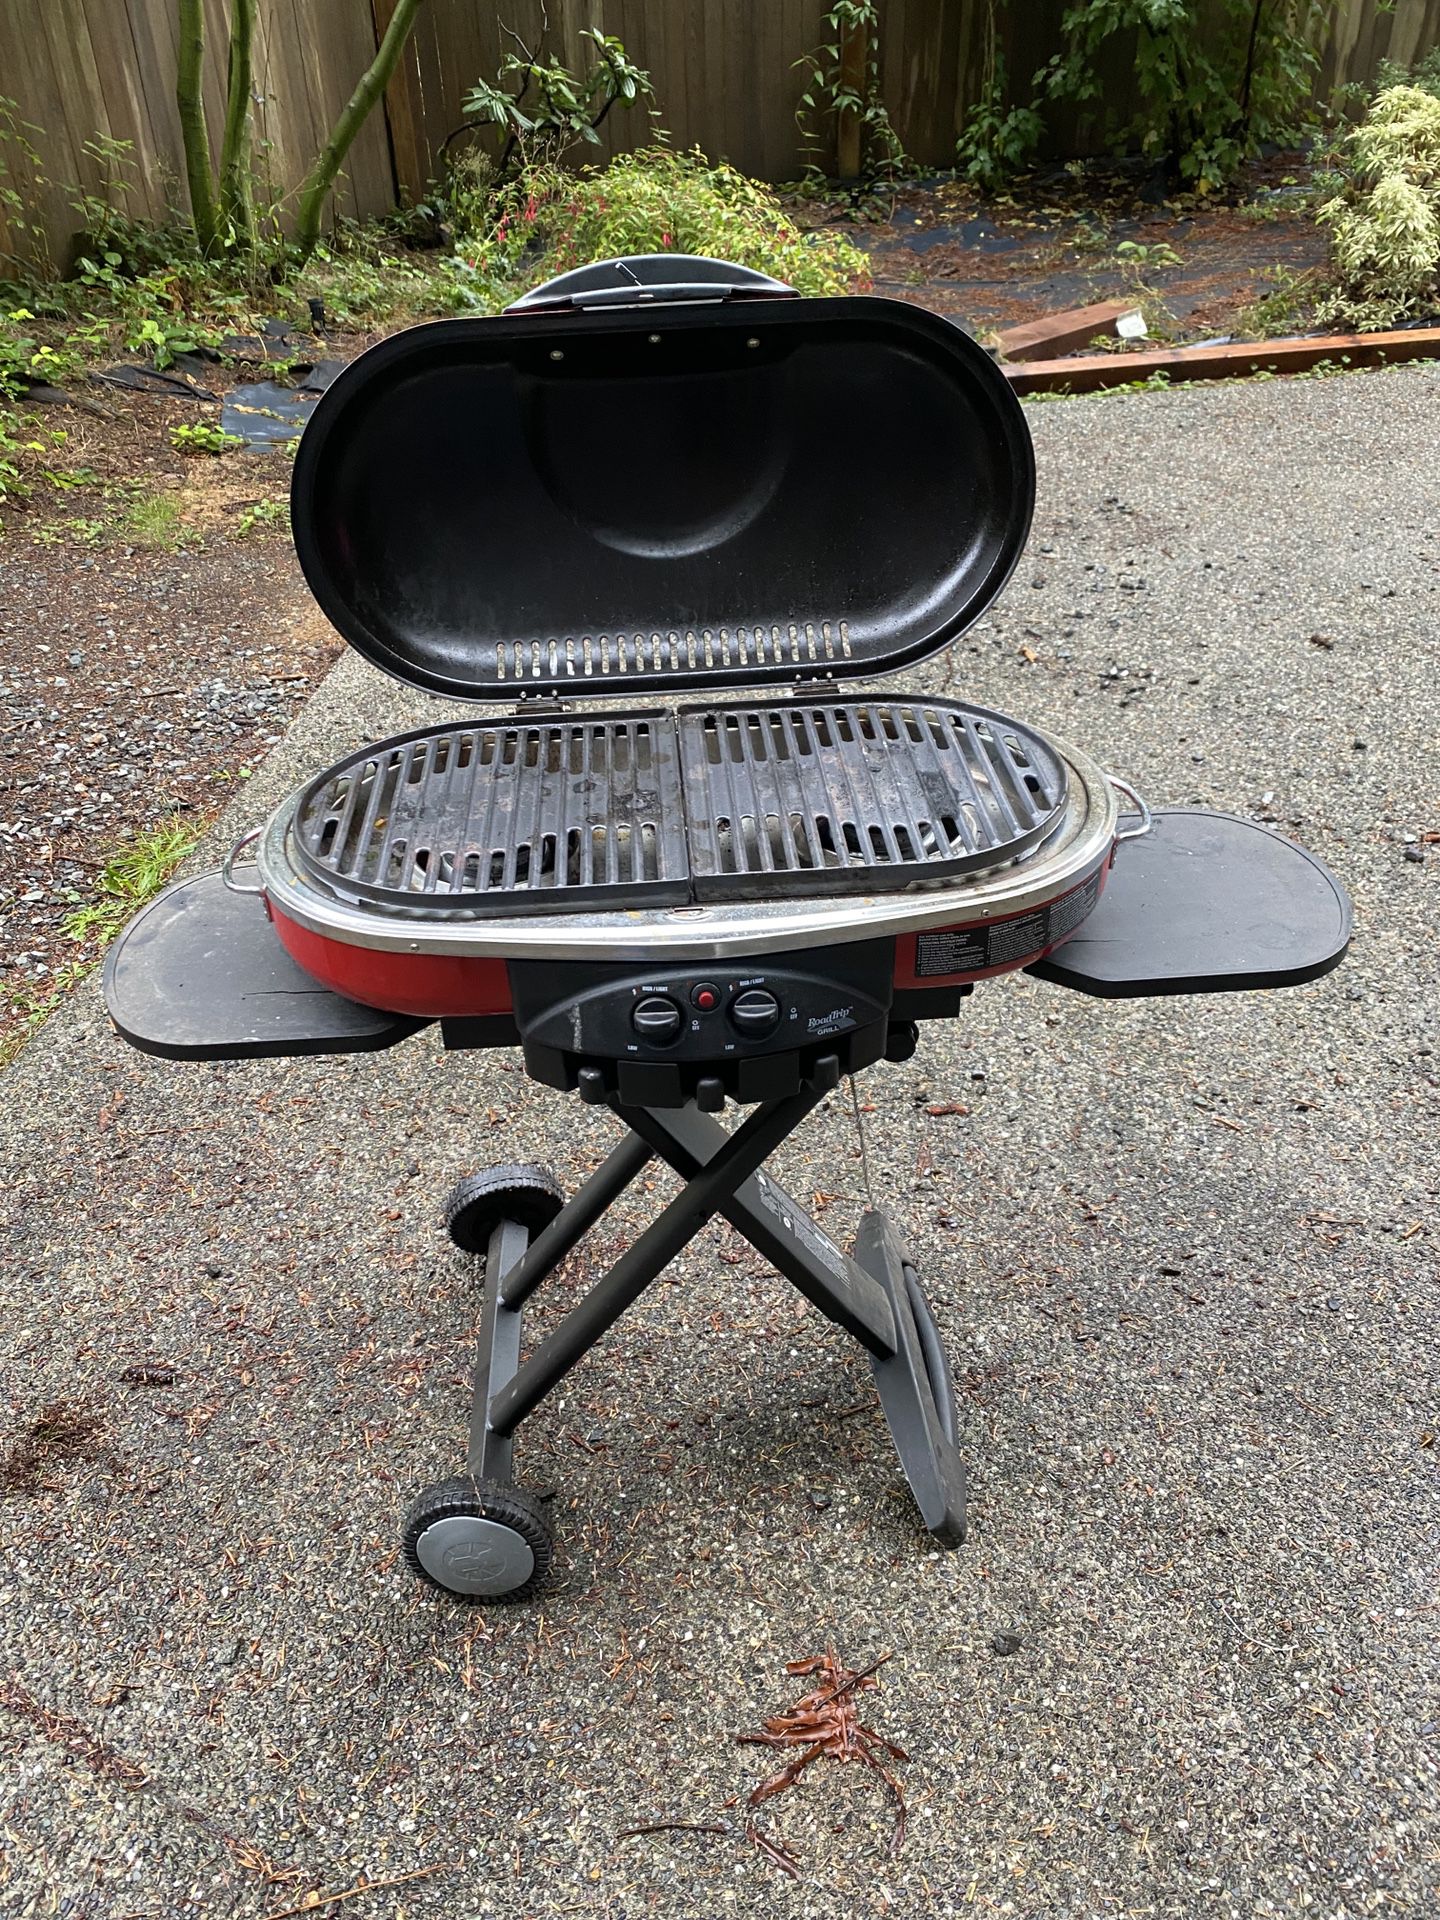 Coleman RoadTrip X-Cursion Propane Grill for Sale in Snohomish, WA - OfferUp